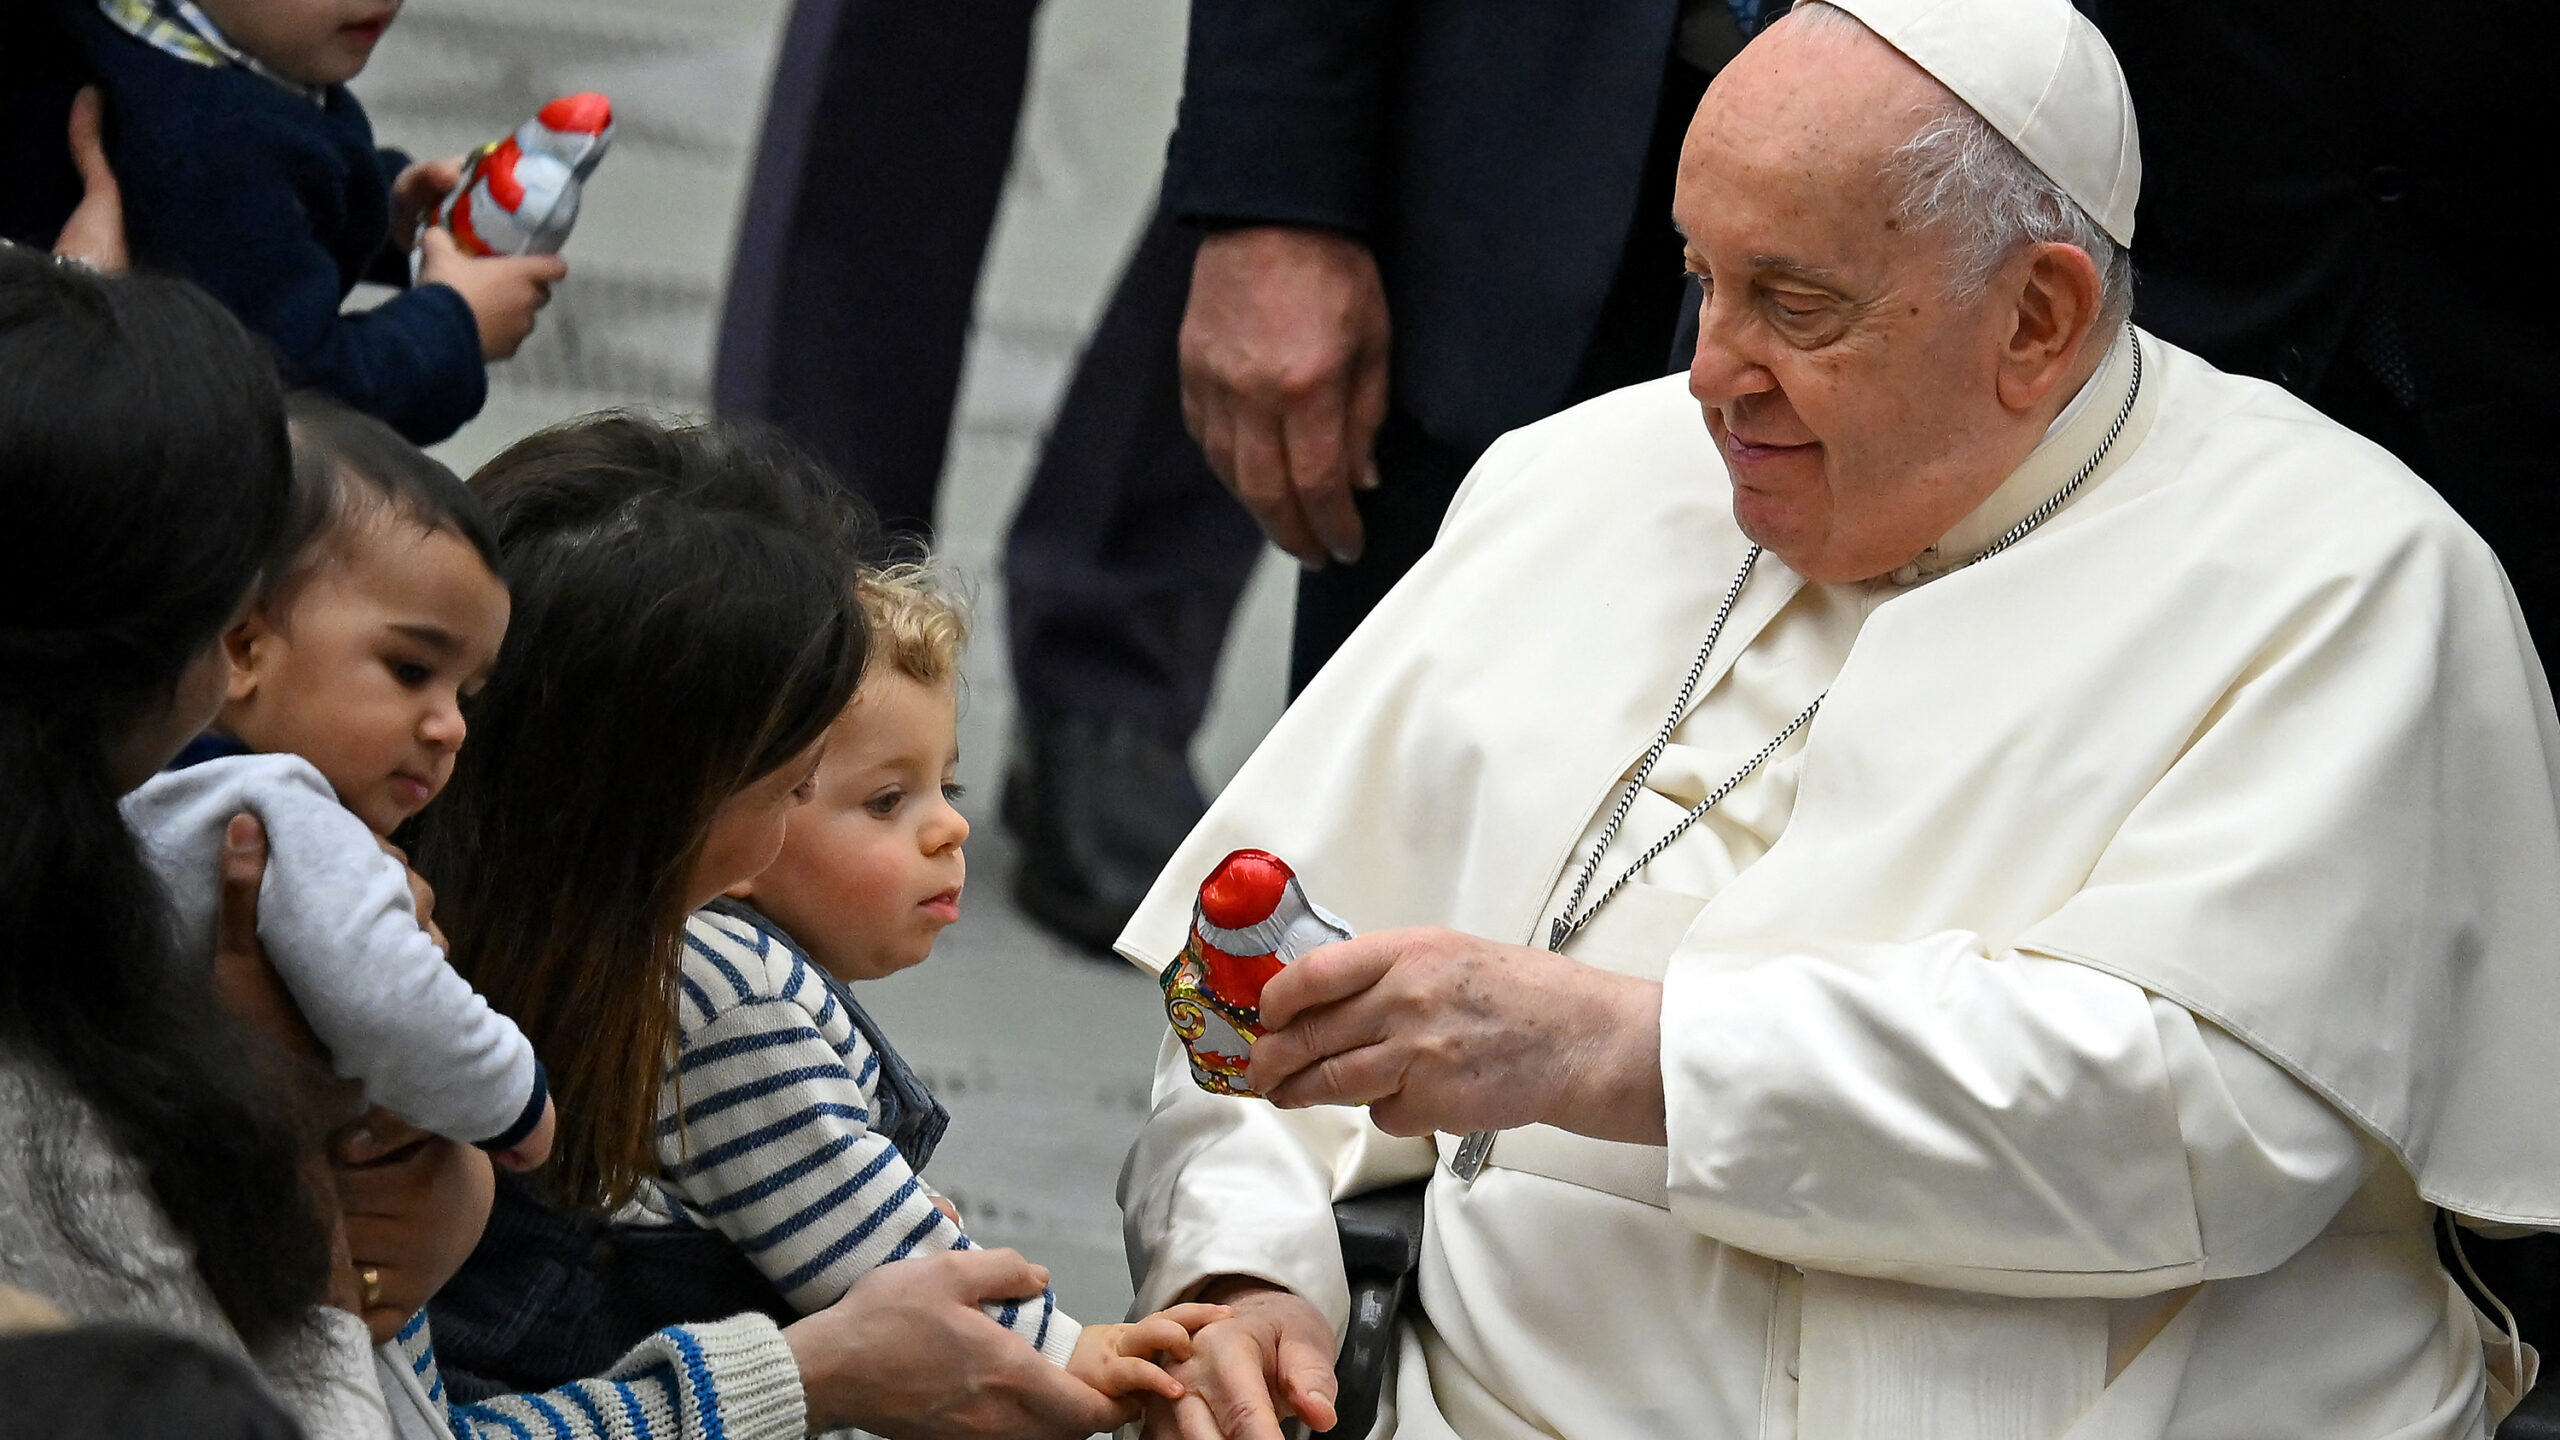 The Pope wants surrogacy banned. Here’s why one advocate says that’s misguided